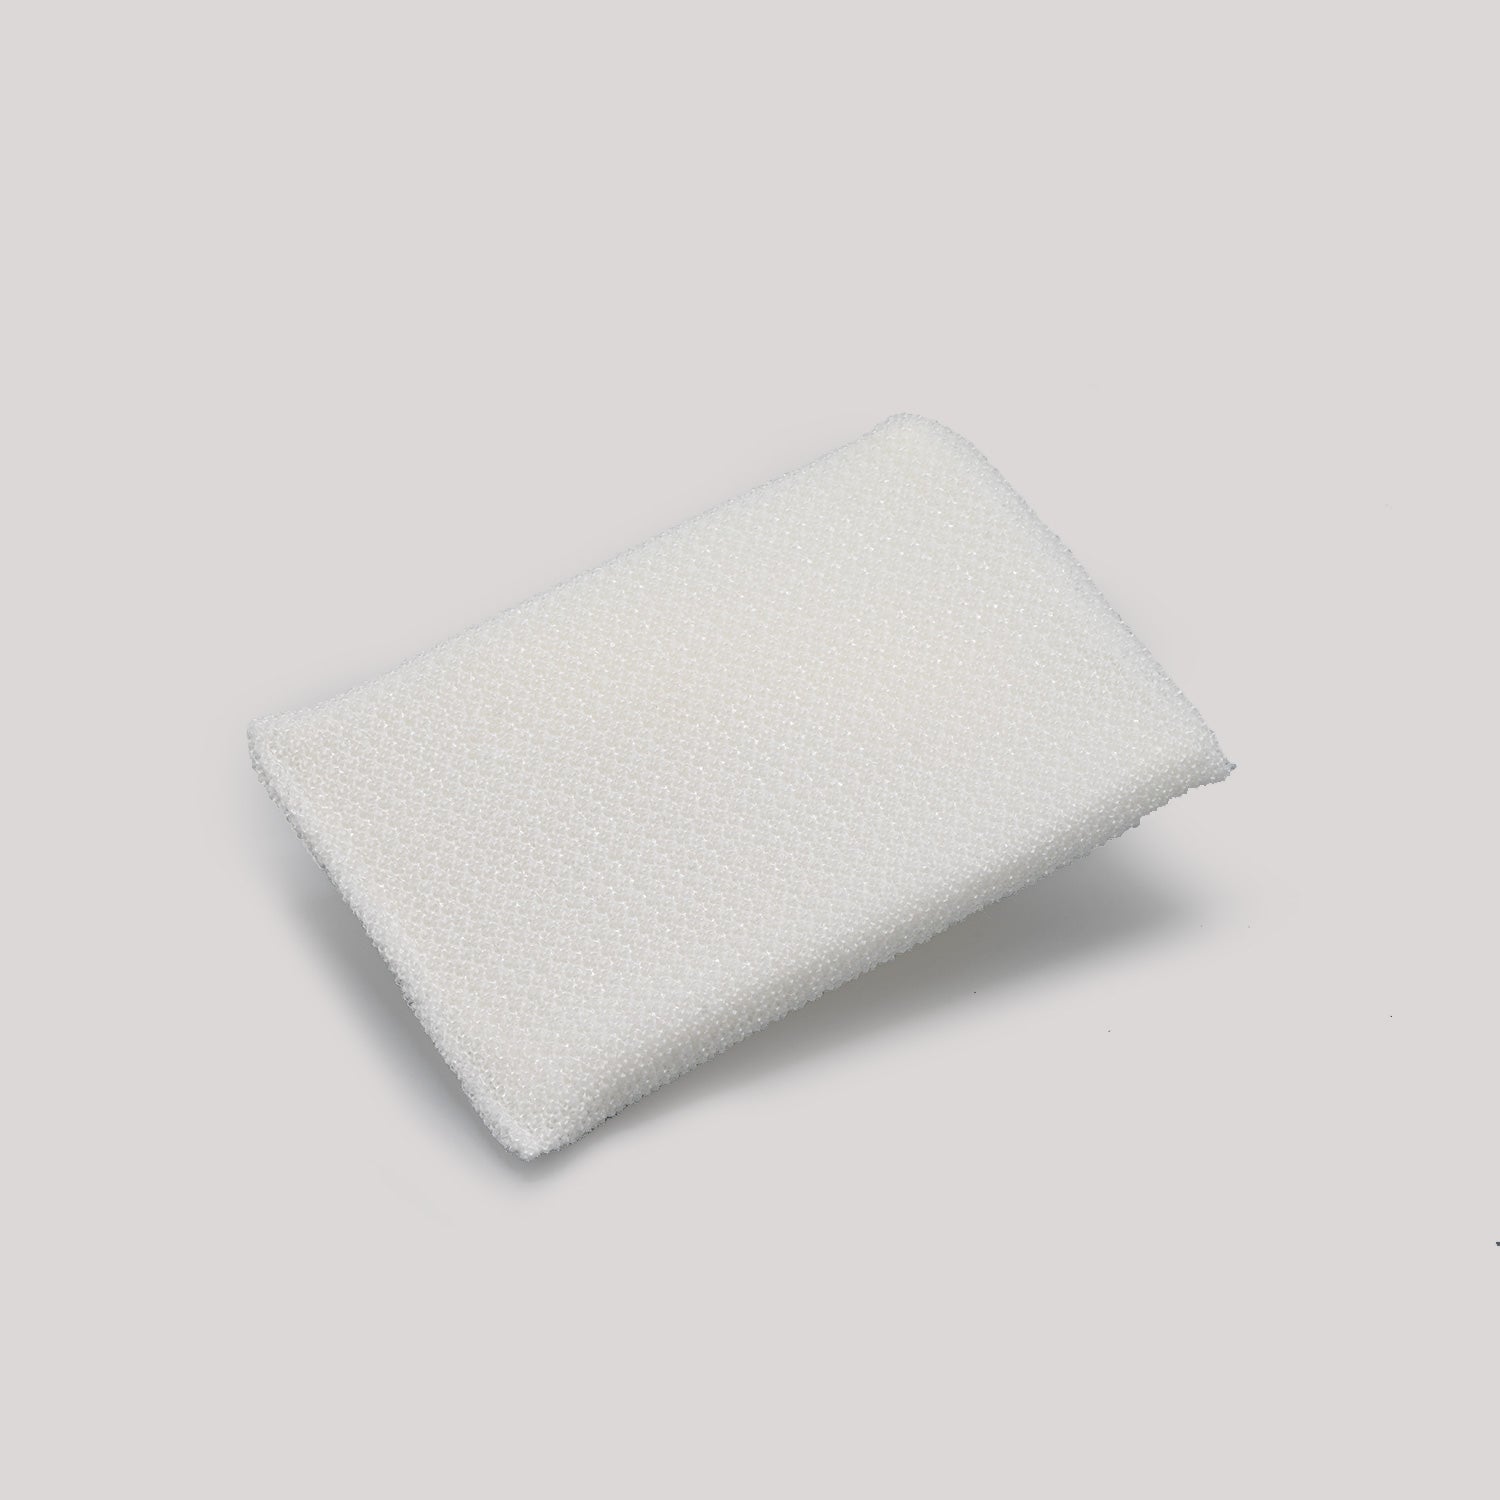 Protective Pads - Buy Protective Pads at Best Price in Nepal